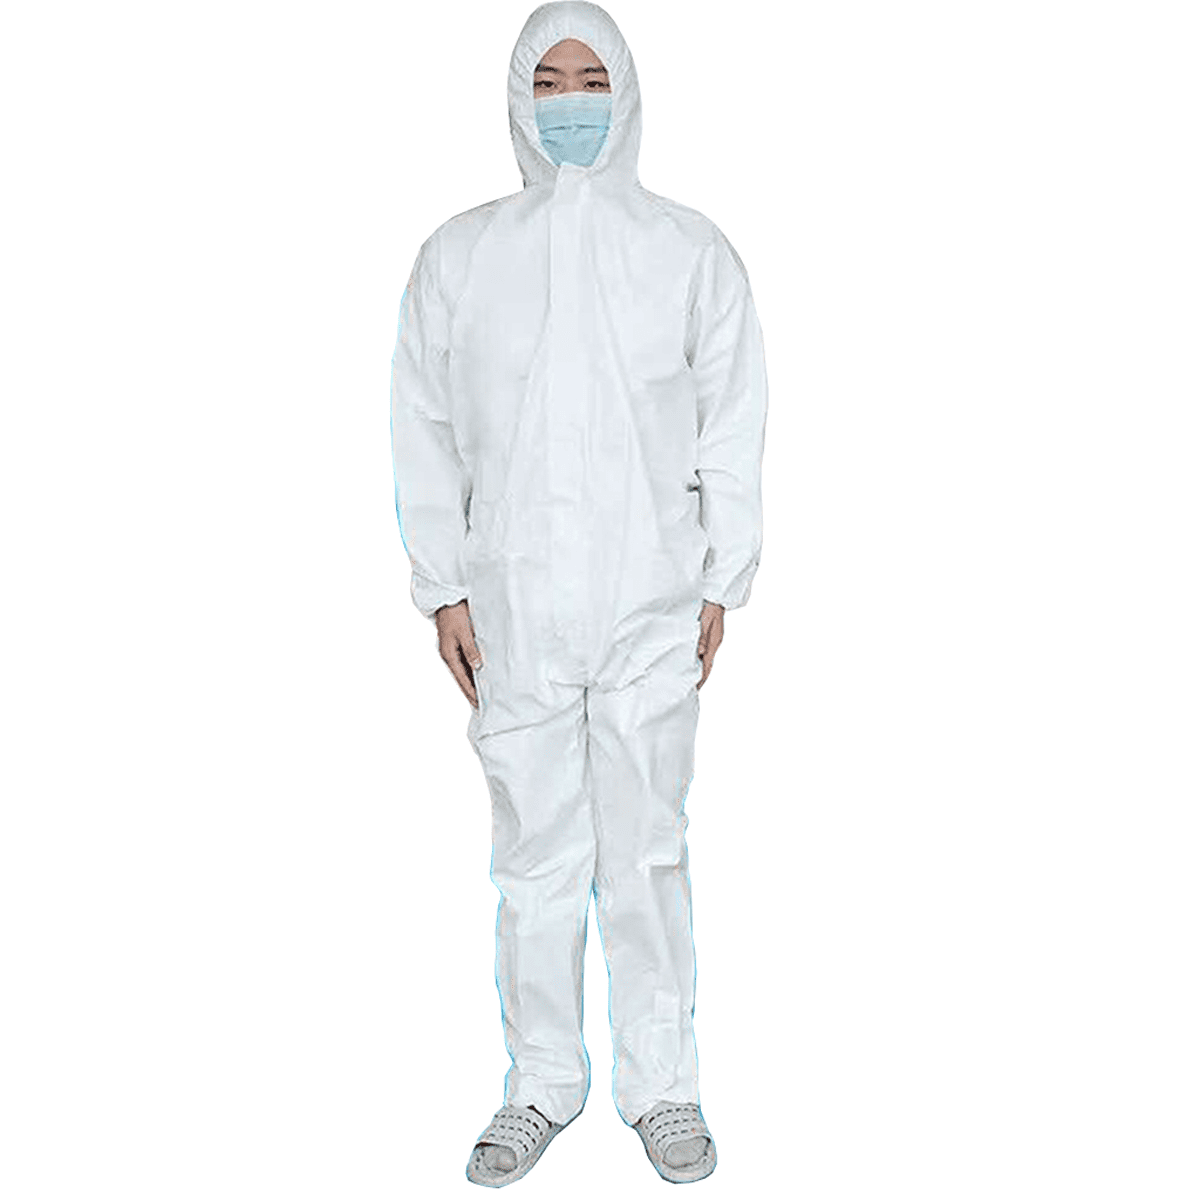 Disposable White Coverall Polypropylene or Blue Boiler suit Overall Lab coat 